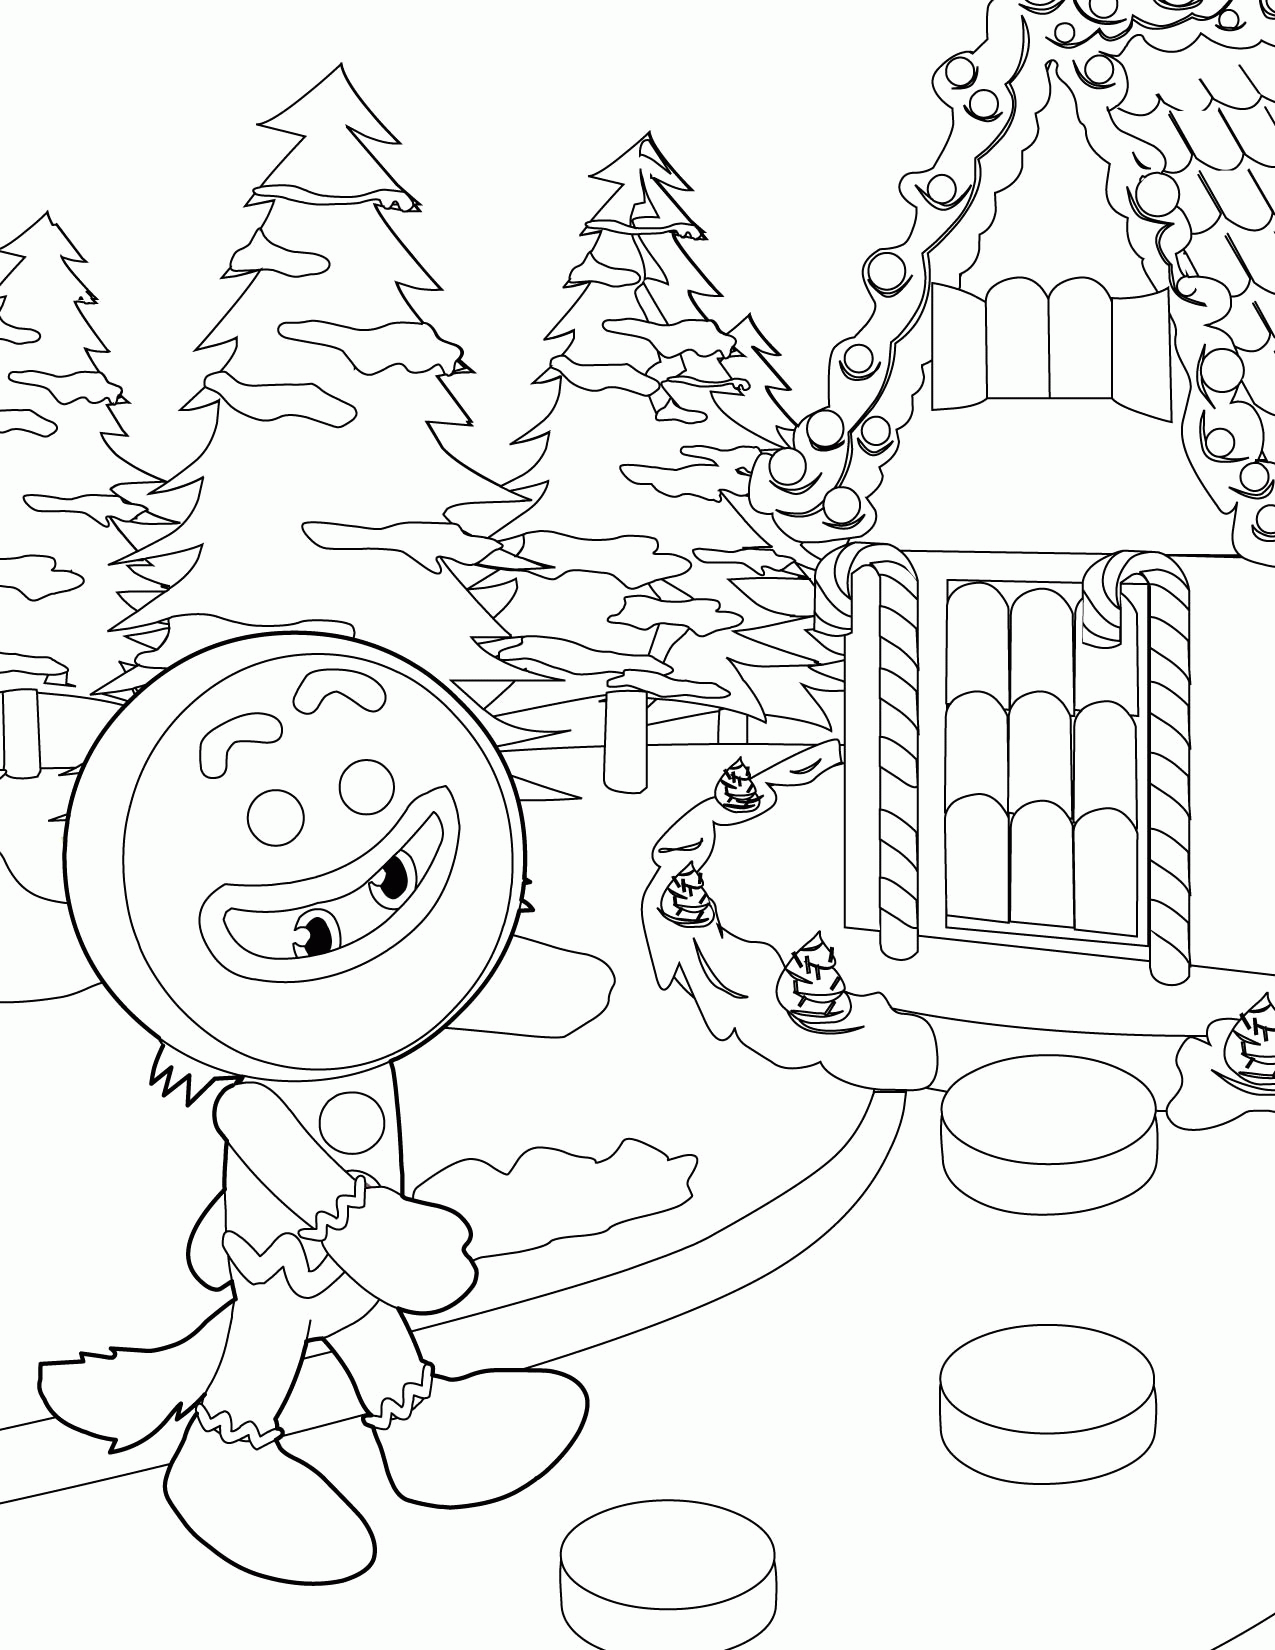 Coloring Pages Of Gingerbread Man Story - Coloring Home